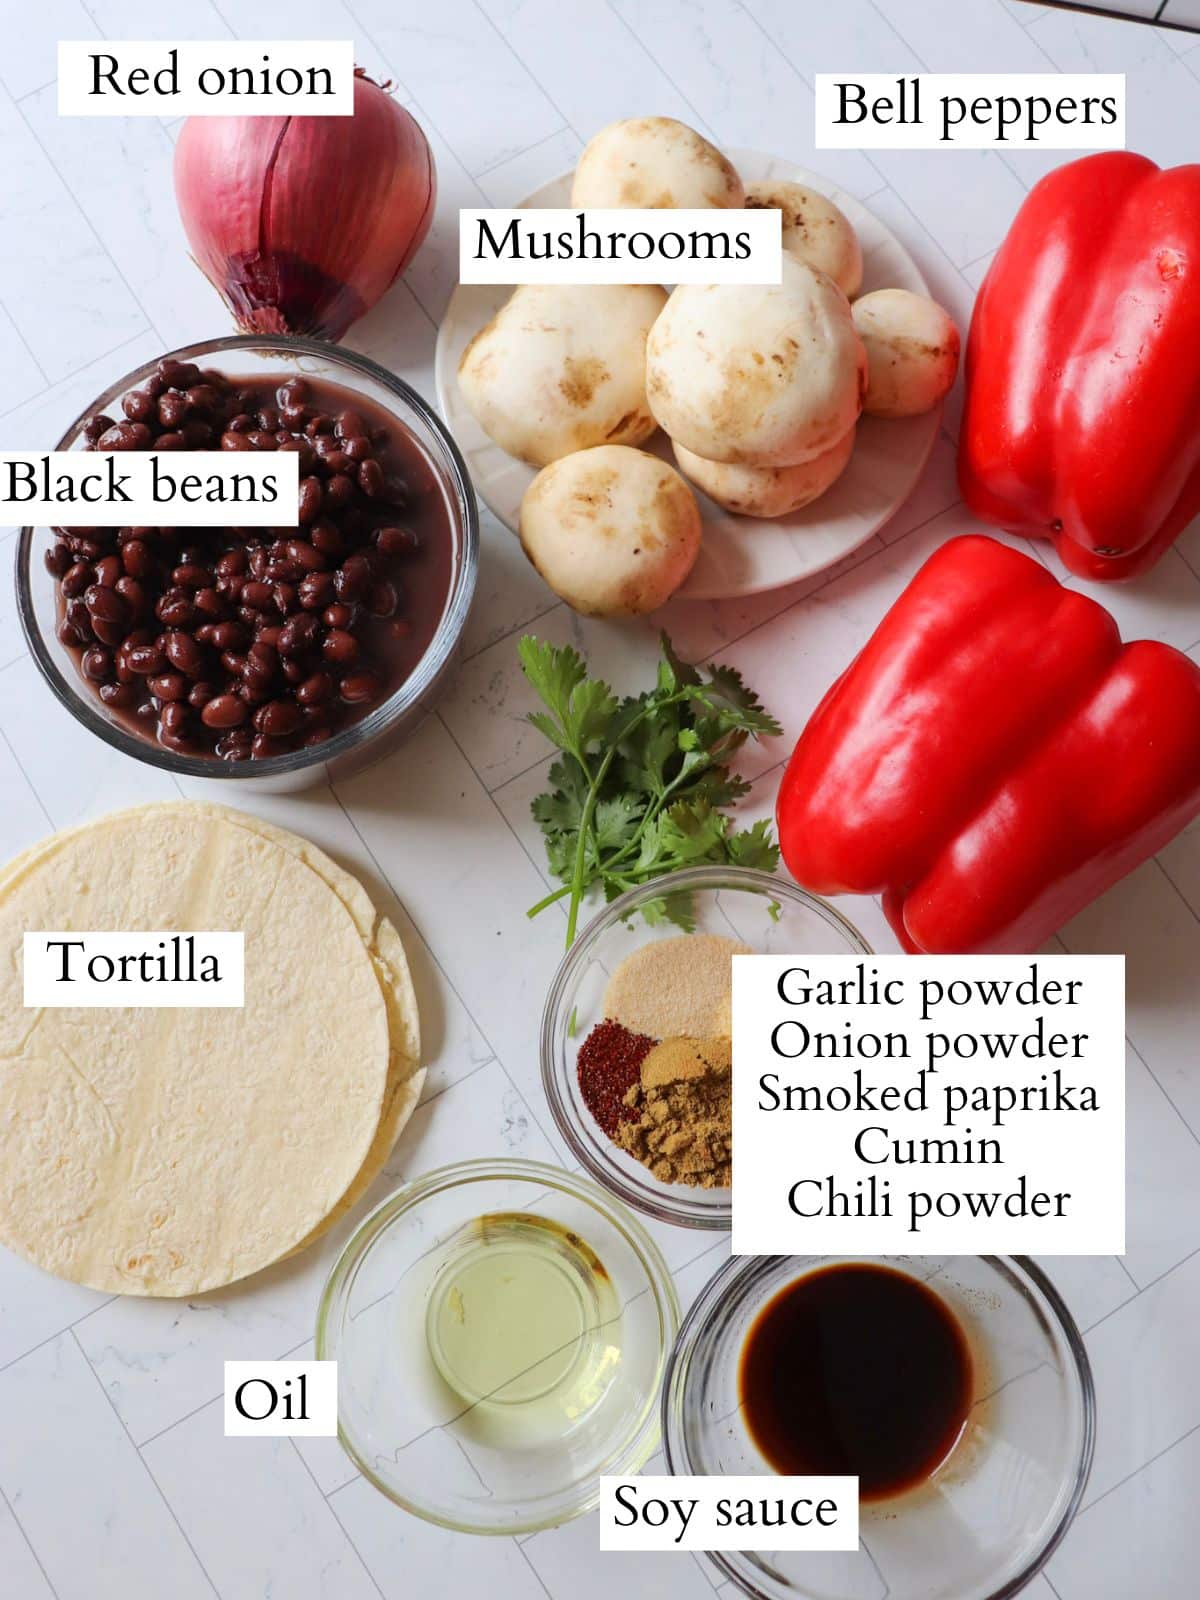 Ingredients for vegetarian black bean fajitas laid out on a kitchen counter.